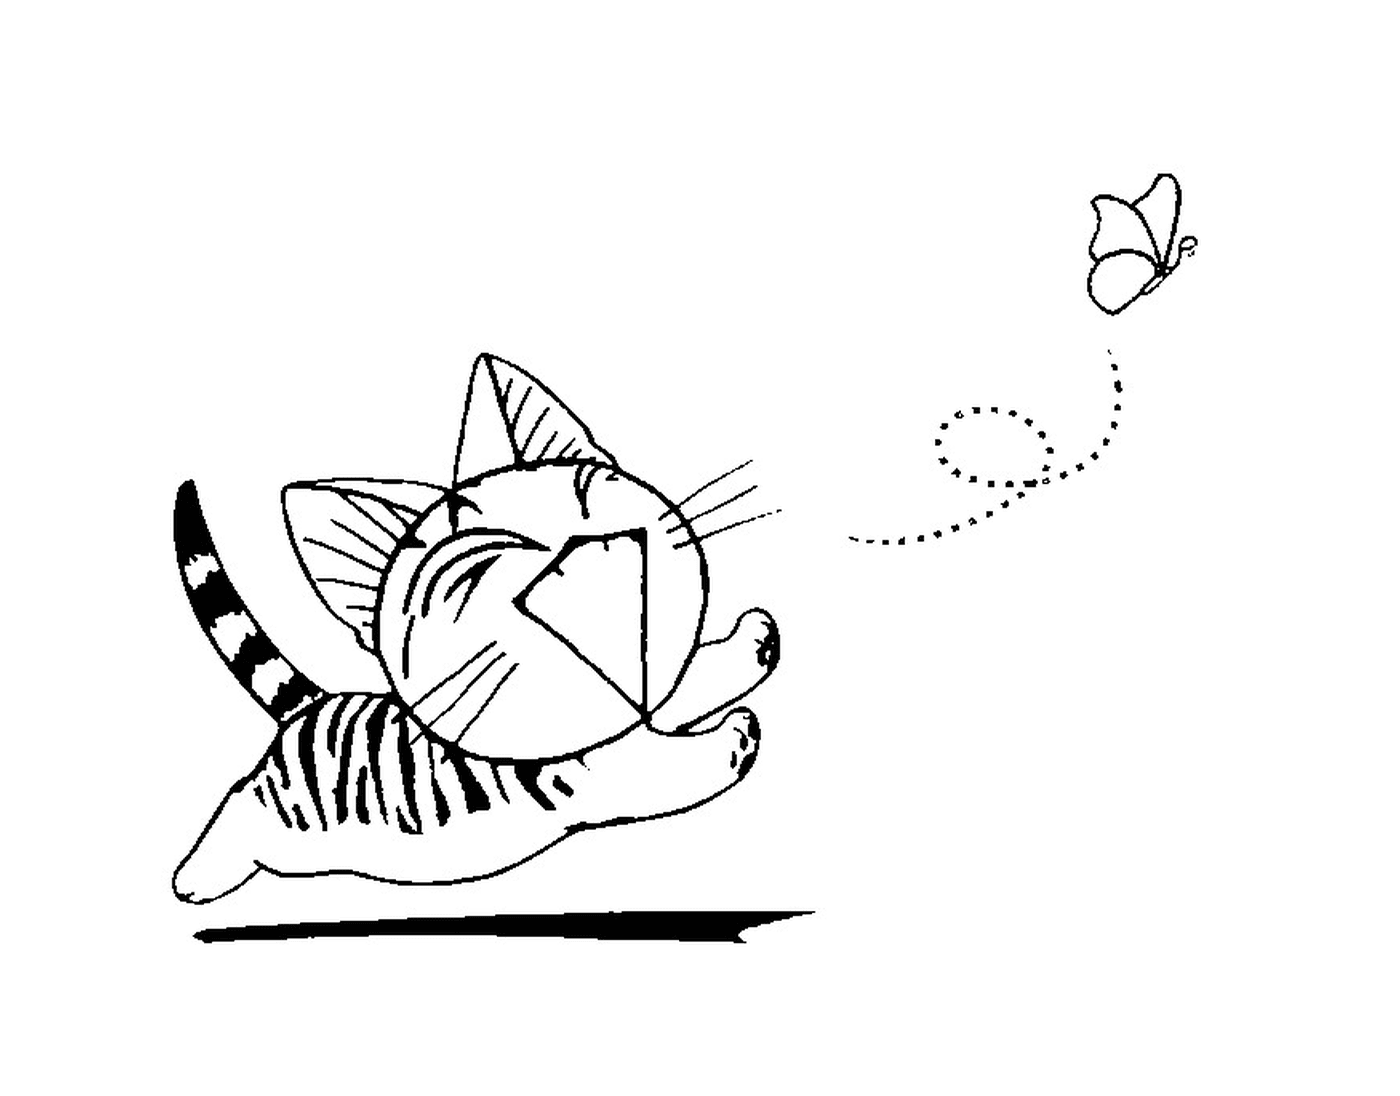  A Chinese cat running after a butterfly 